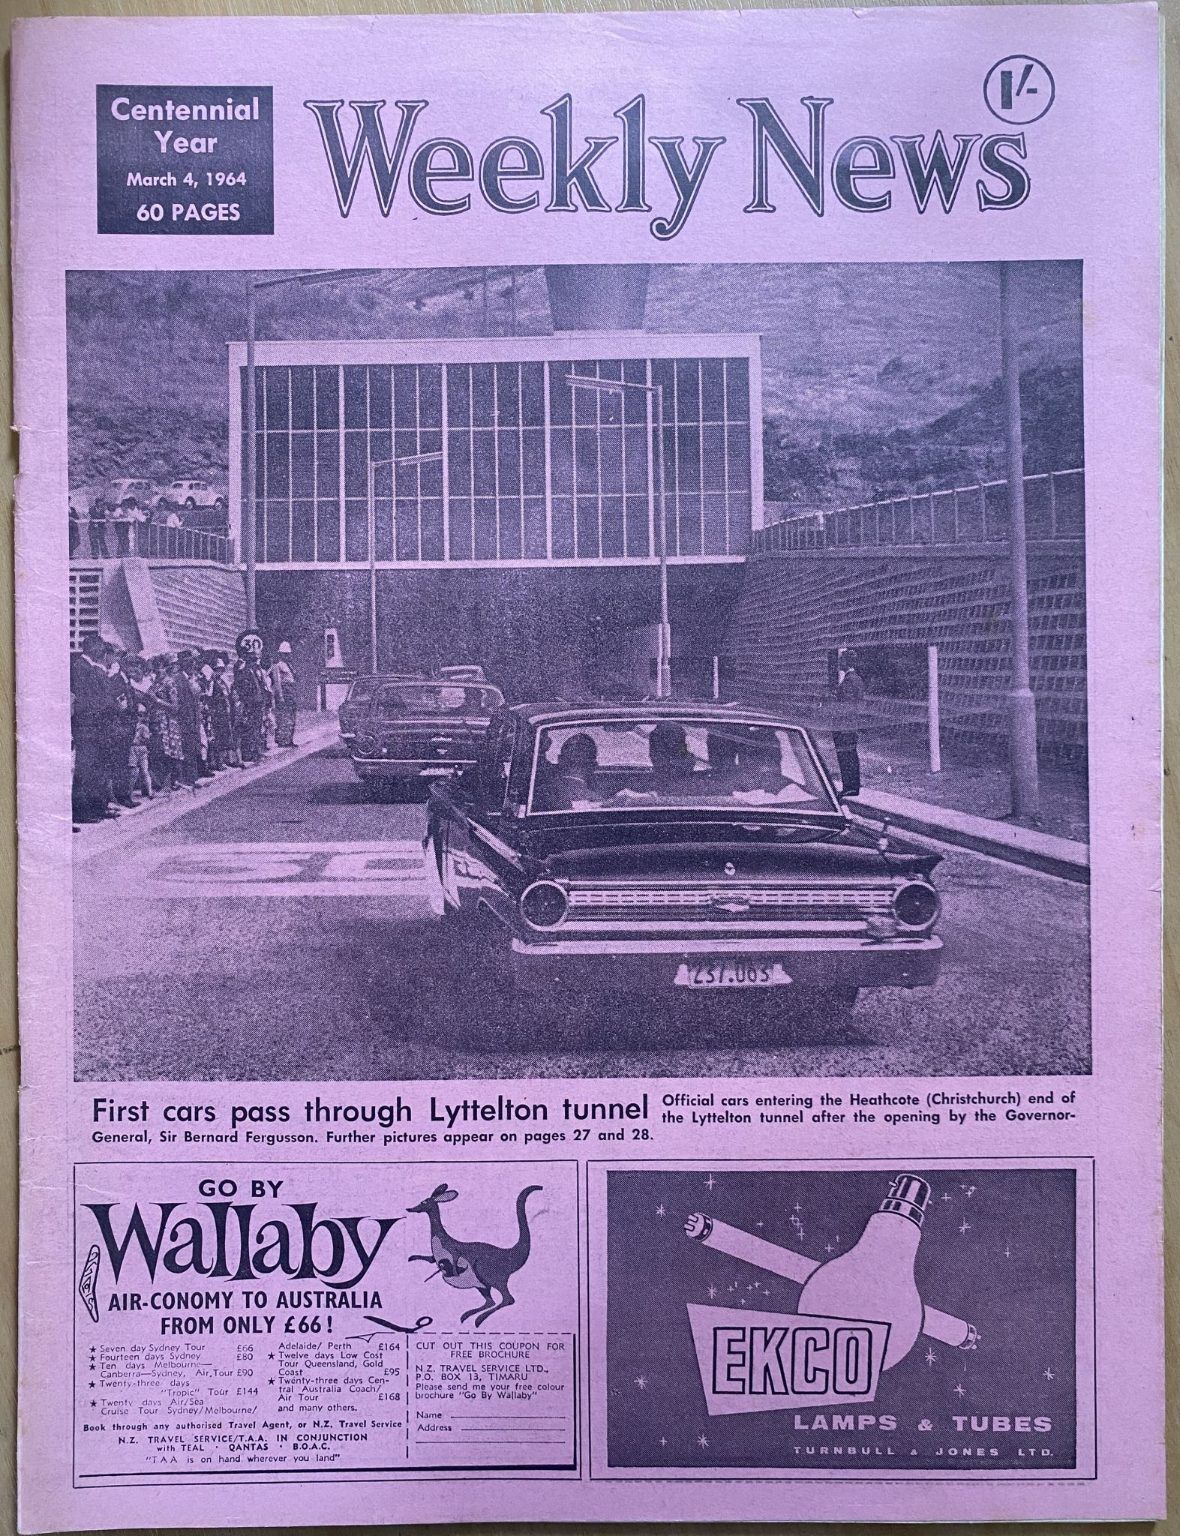 OLD NEWSPAPER: Weekly News, No. 5232, 4 March 1964